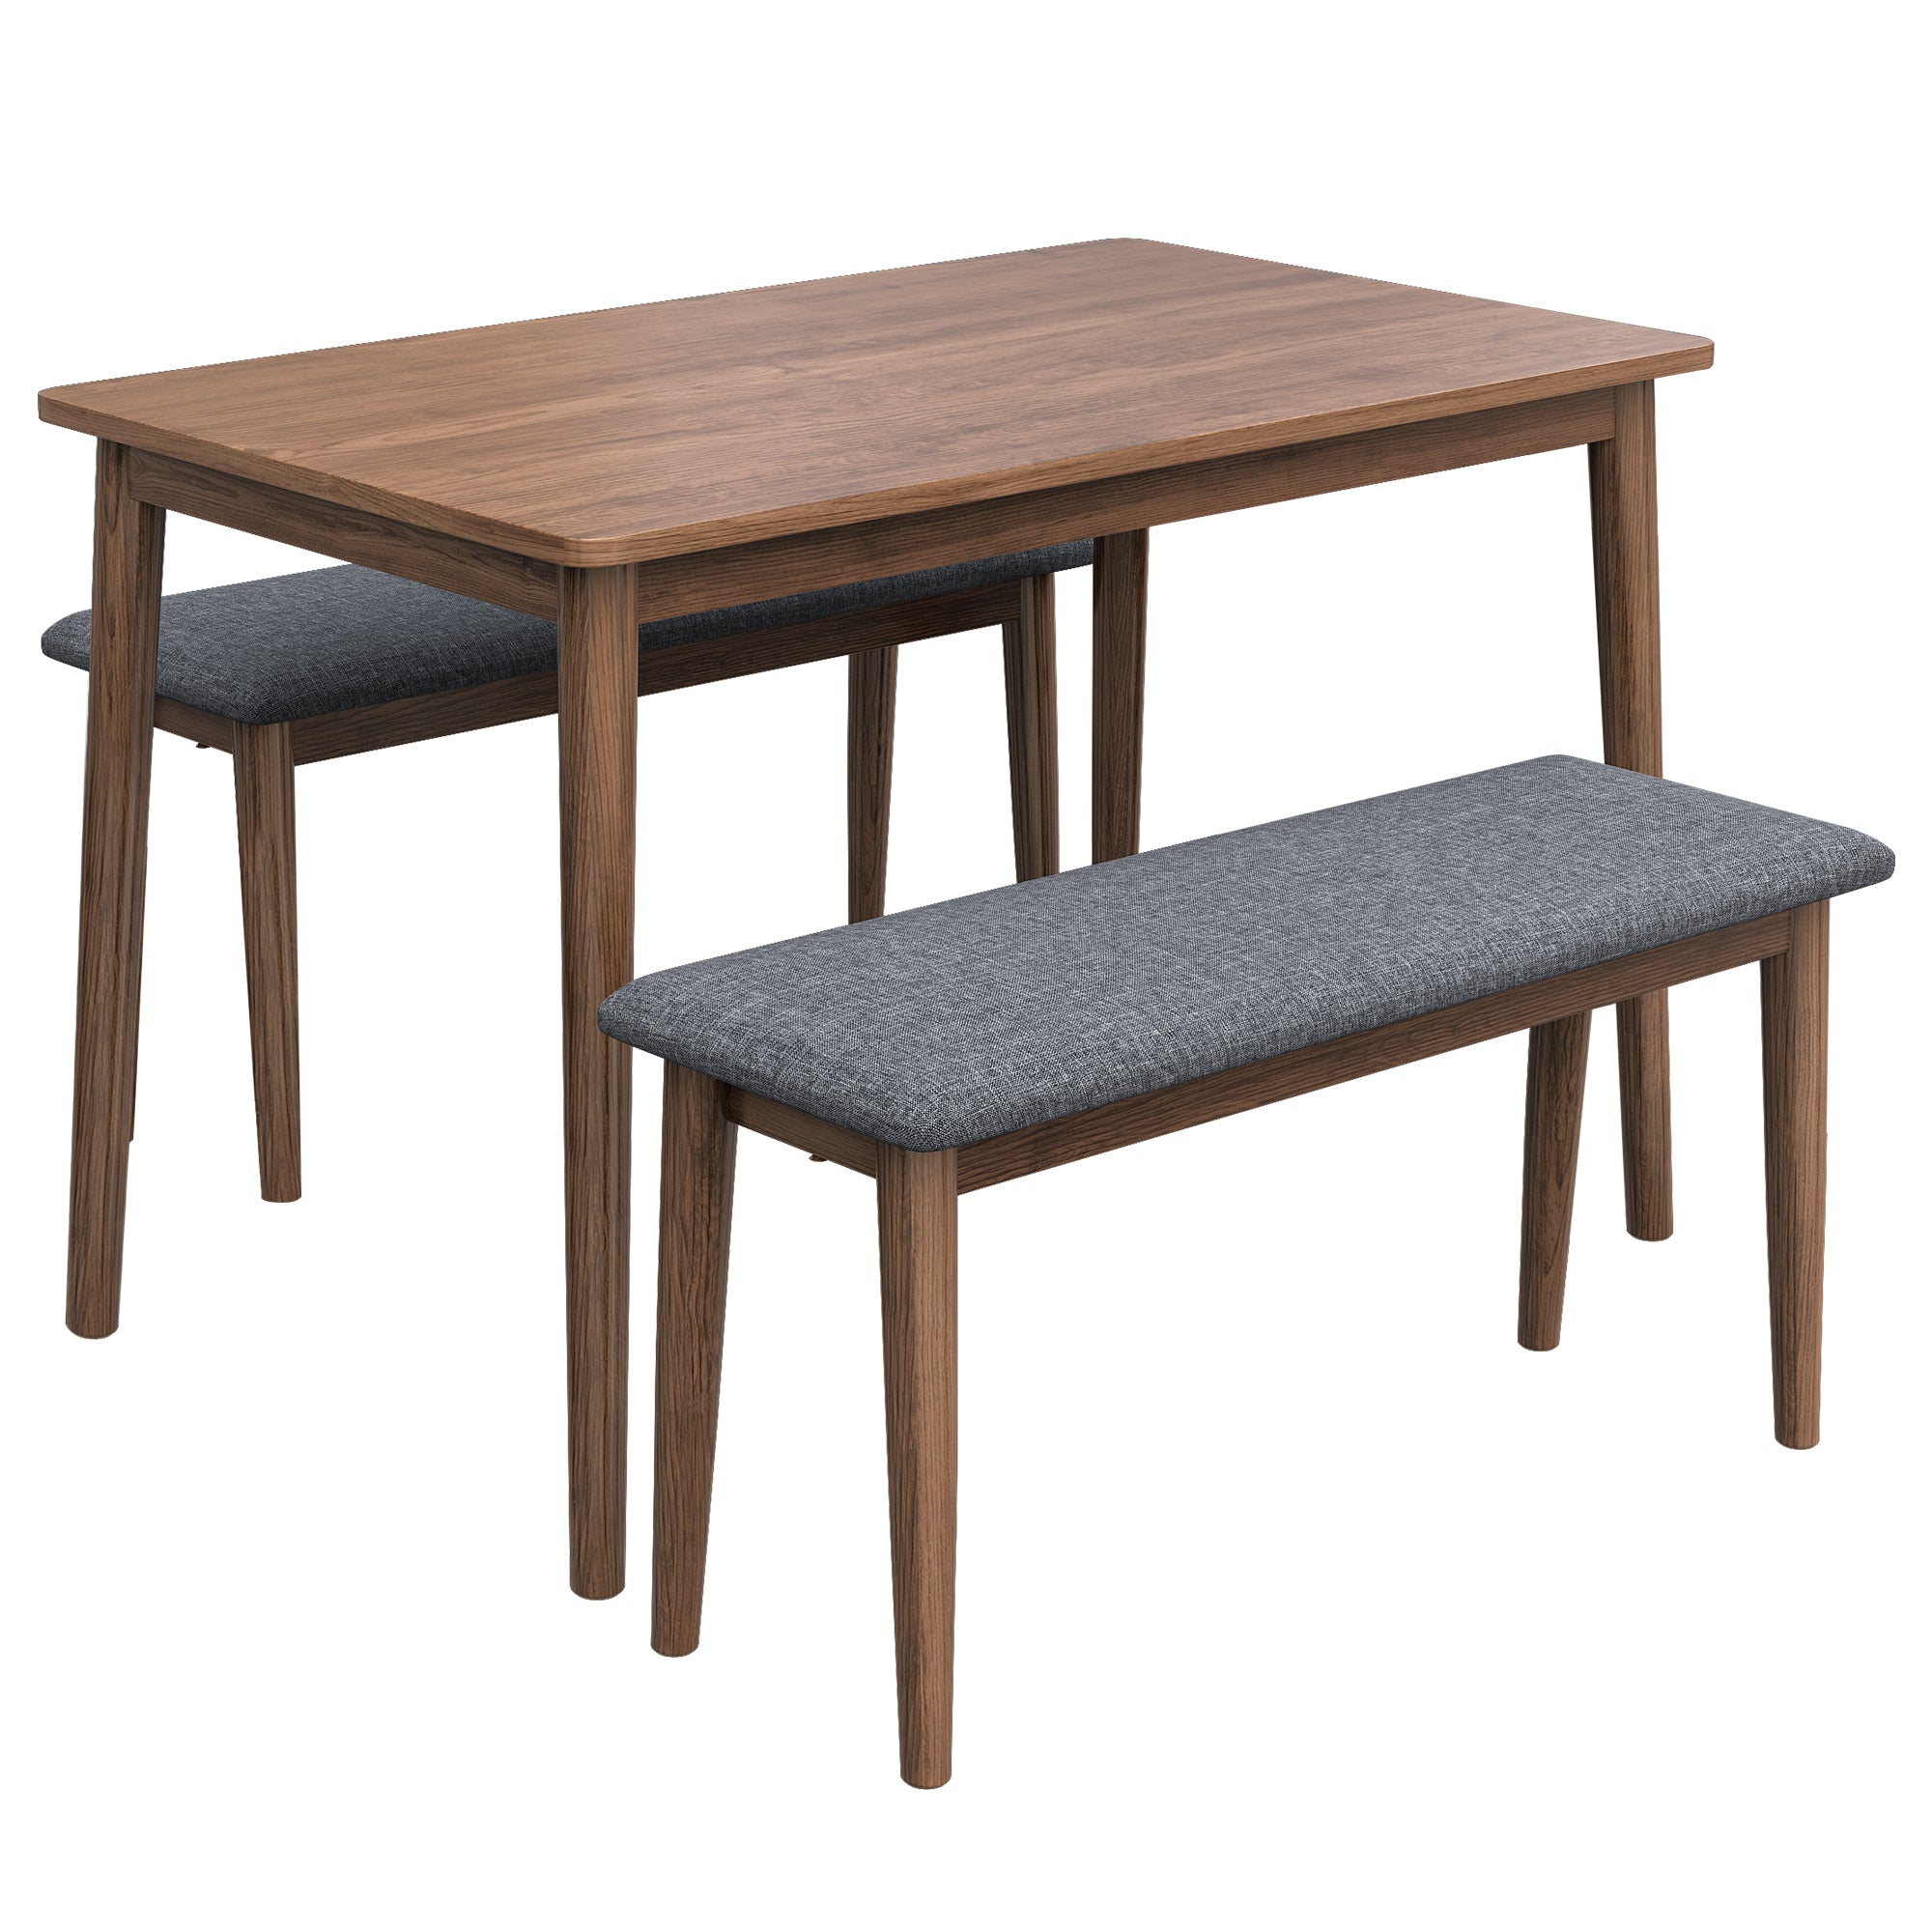 3 Pieces Modern Dining Table Set with 1 Rectangular walnut-rubber wood